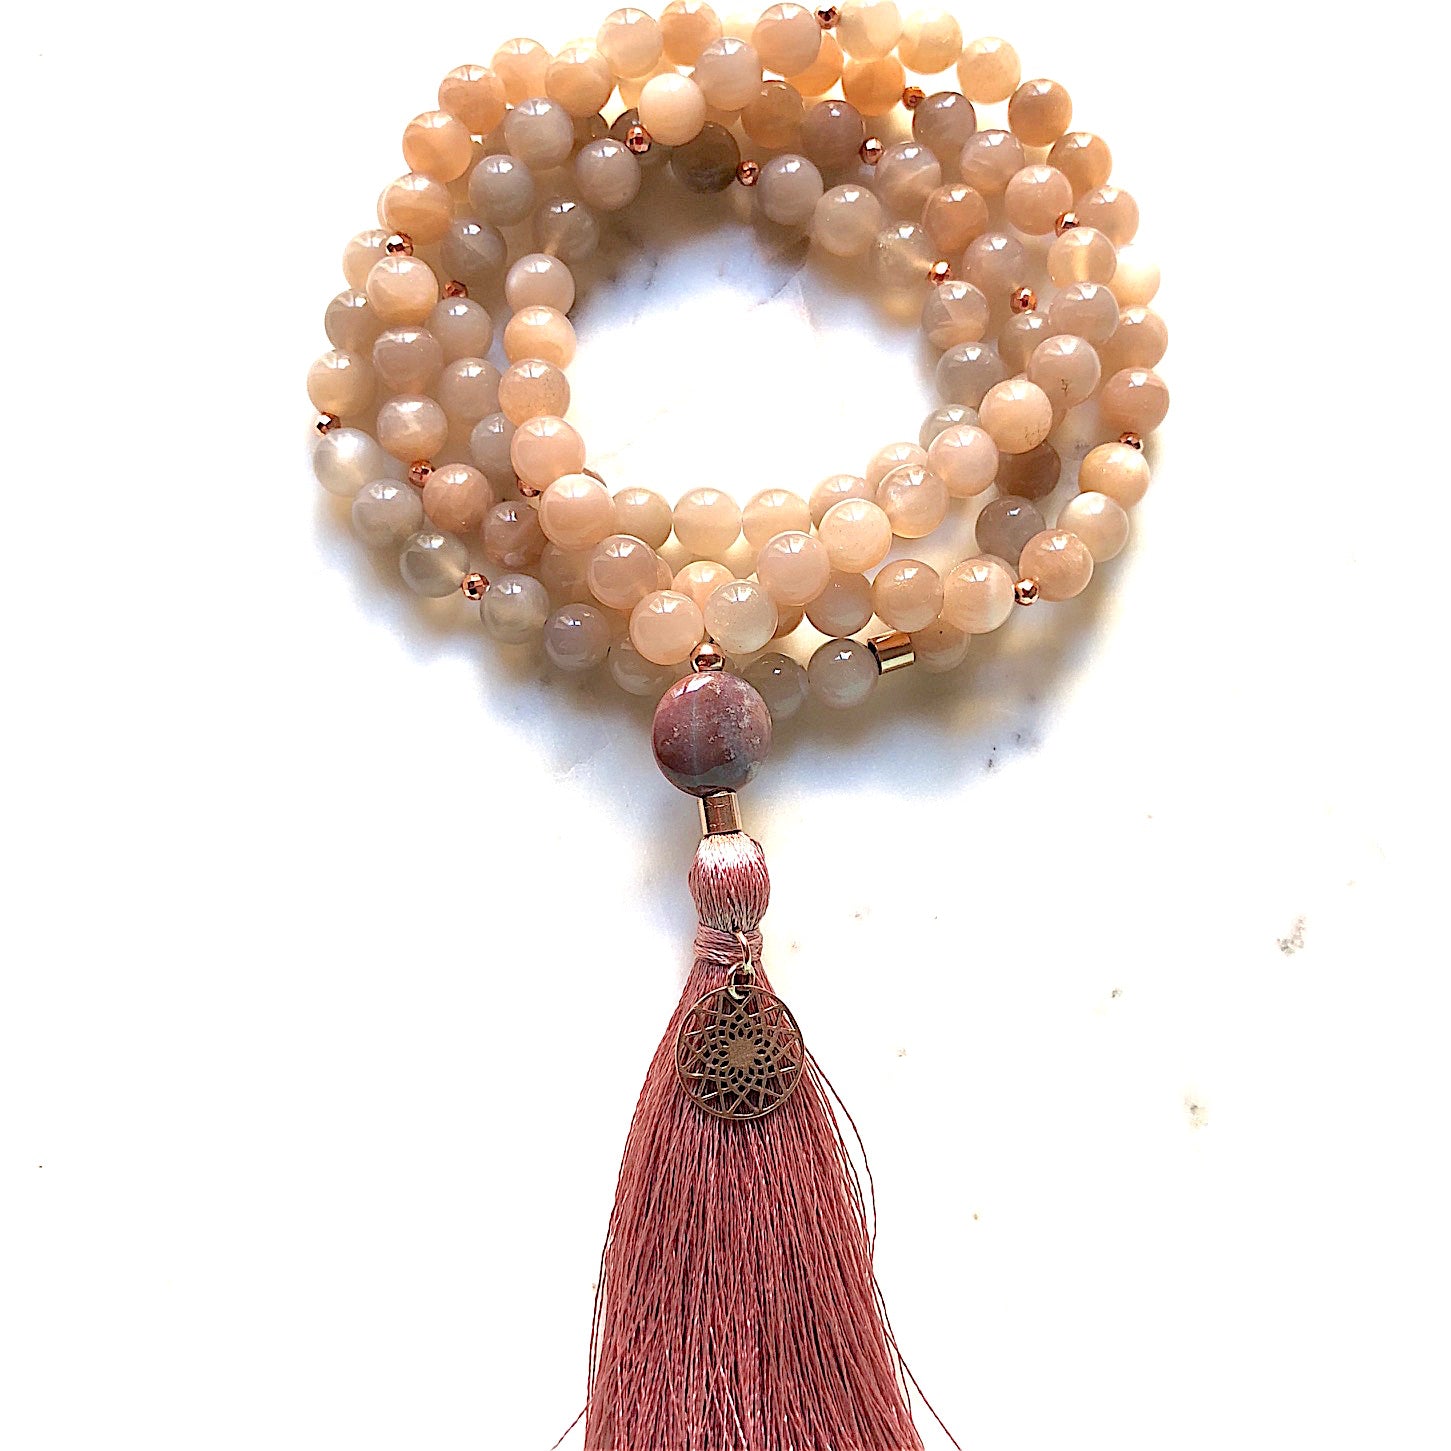 Aria Mala Atelier's unique one-of-a-kind Sunstone, Carnelian Agate gemstone mala with silver mandala charm is for yoga meditation empowering spiritual daily practise and intention setting